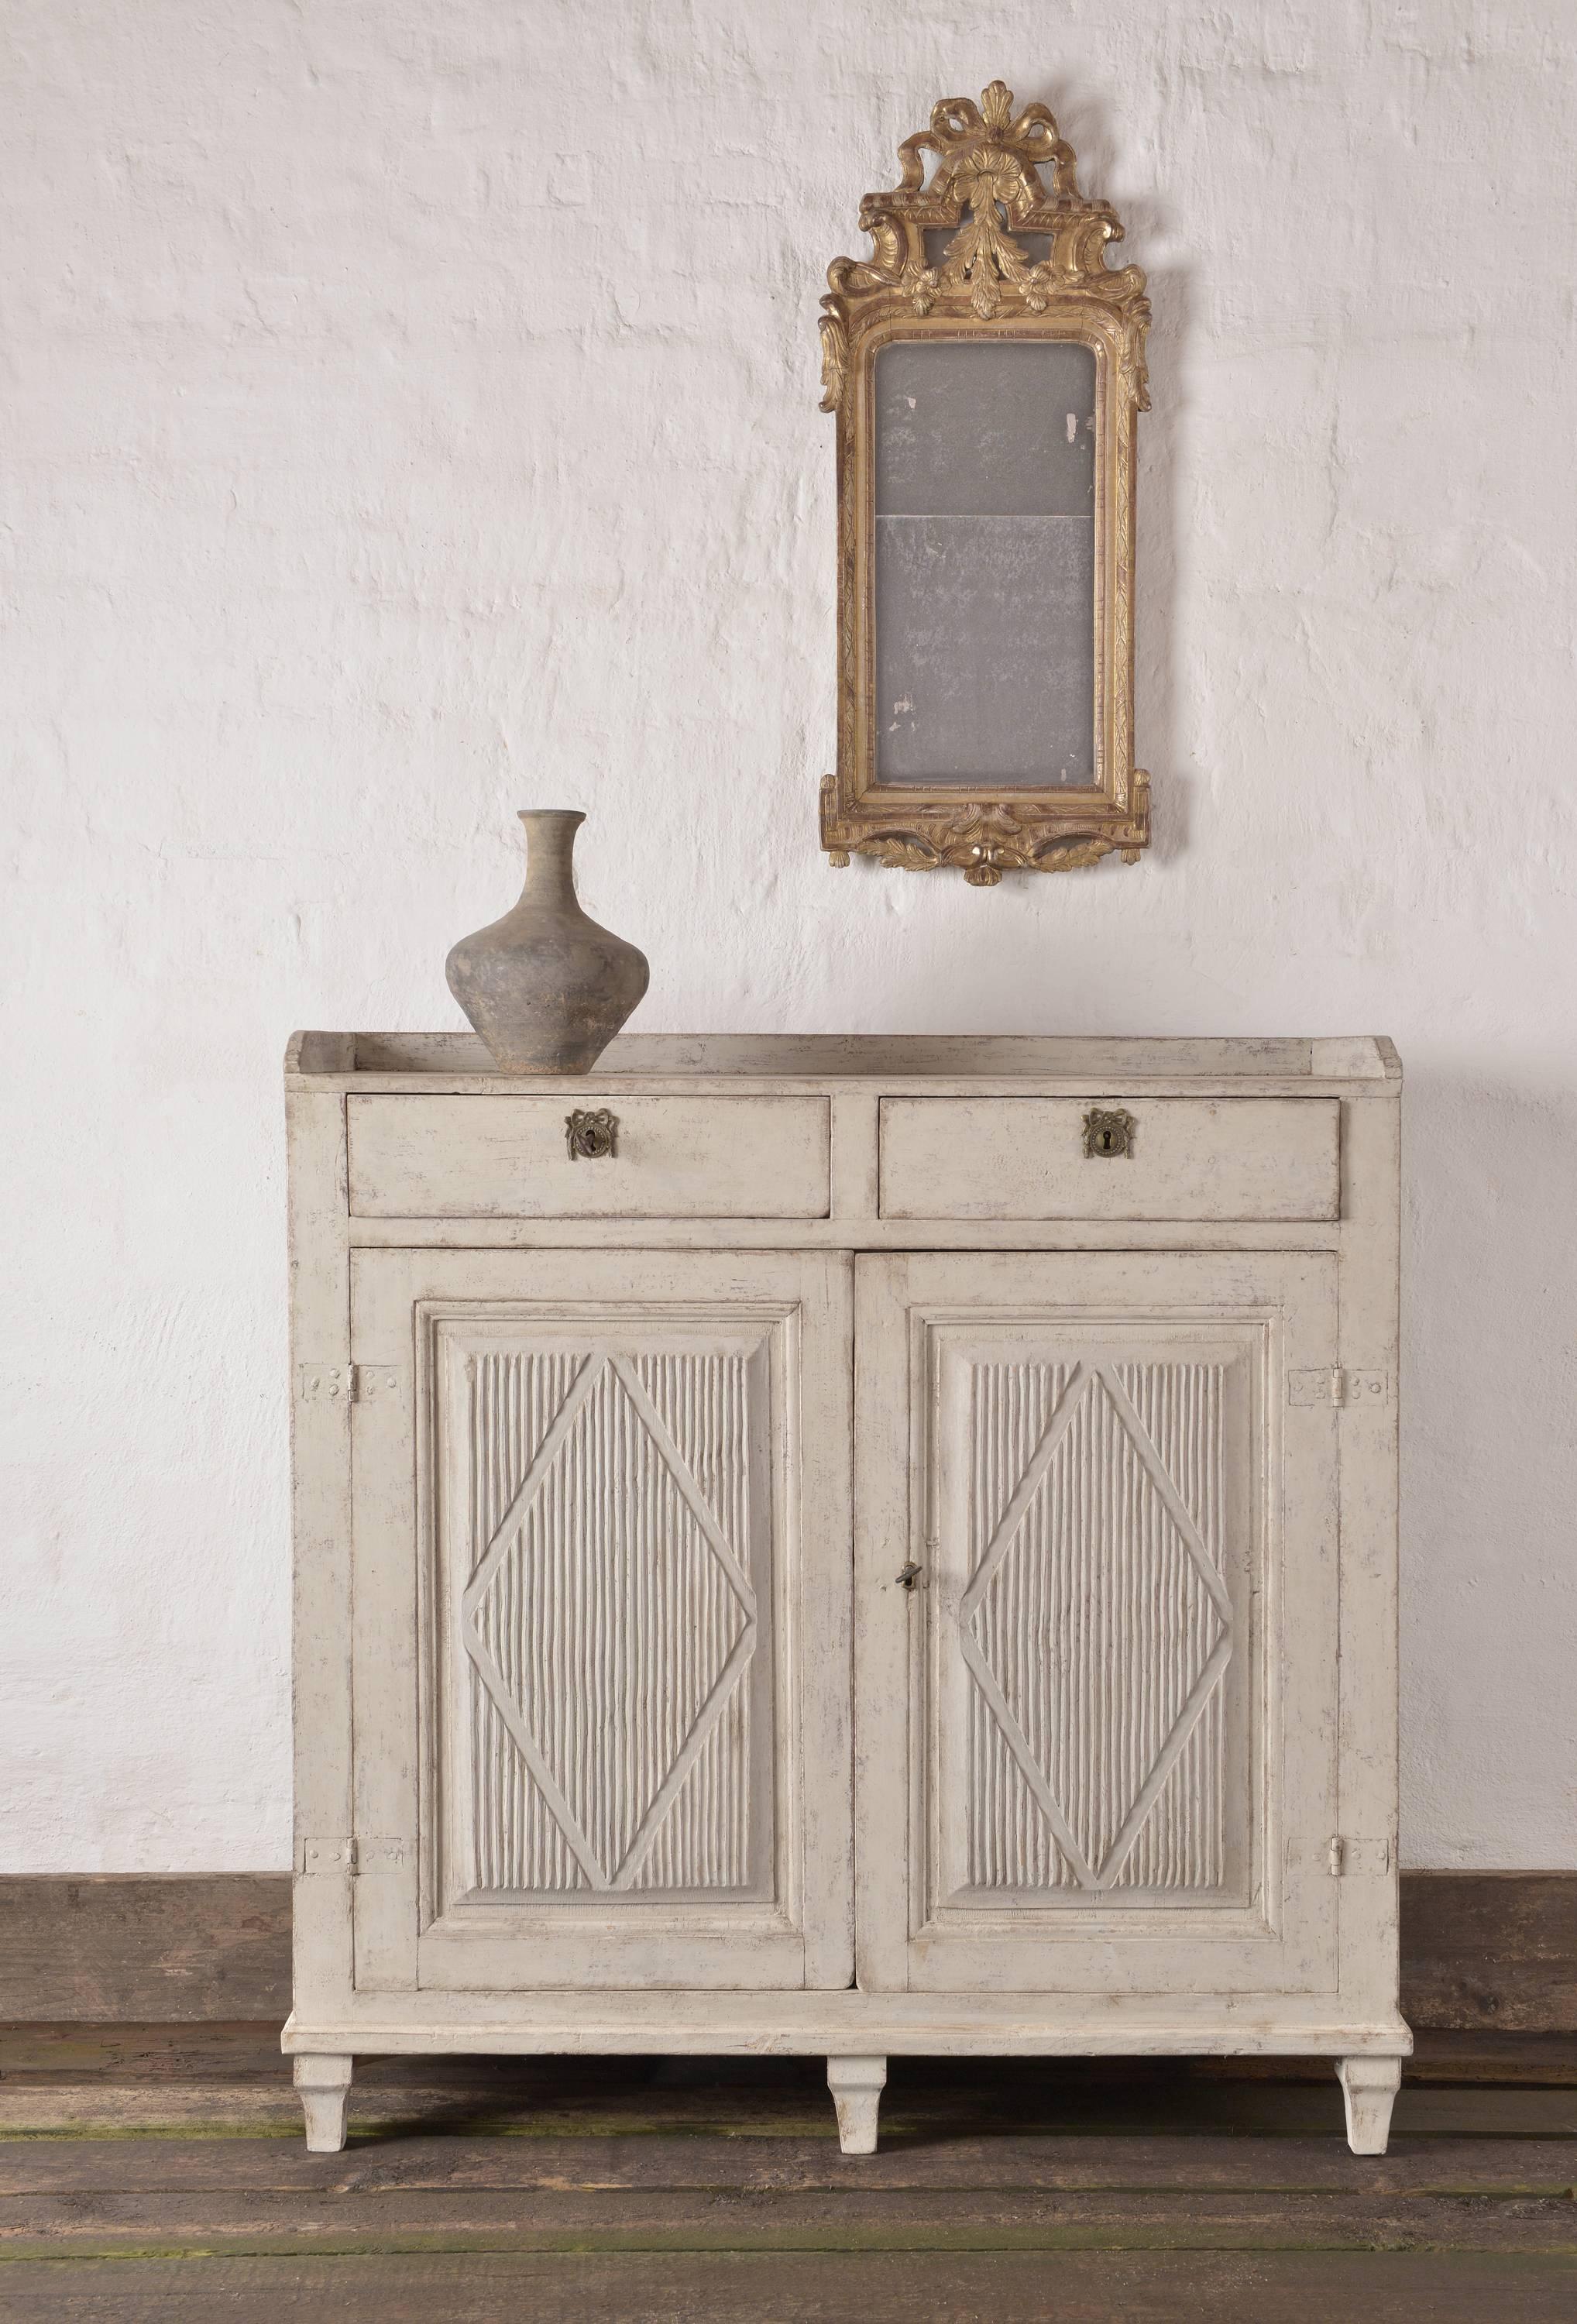 Beautiful Gustavian sideboard from northern Sweden. Reeded fronted doors with harlequin carvings. In northern Sweden the Gustavian Style prevailed well into the 19th century, and this dates to circa 1810-1820. A quintessential Gustavian piece that